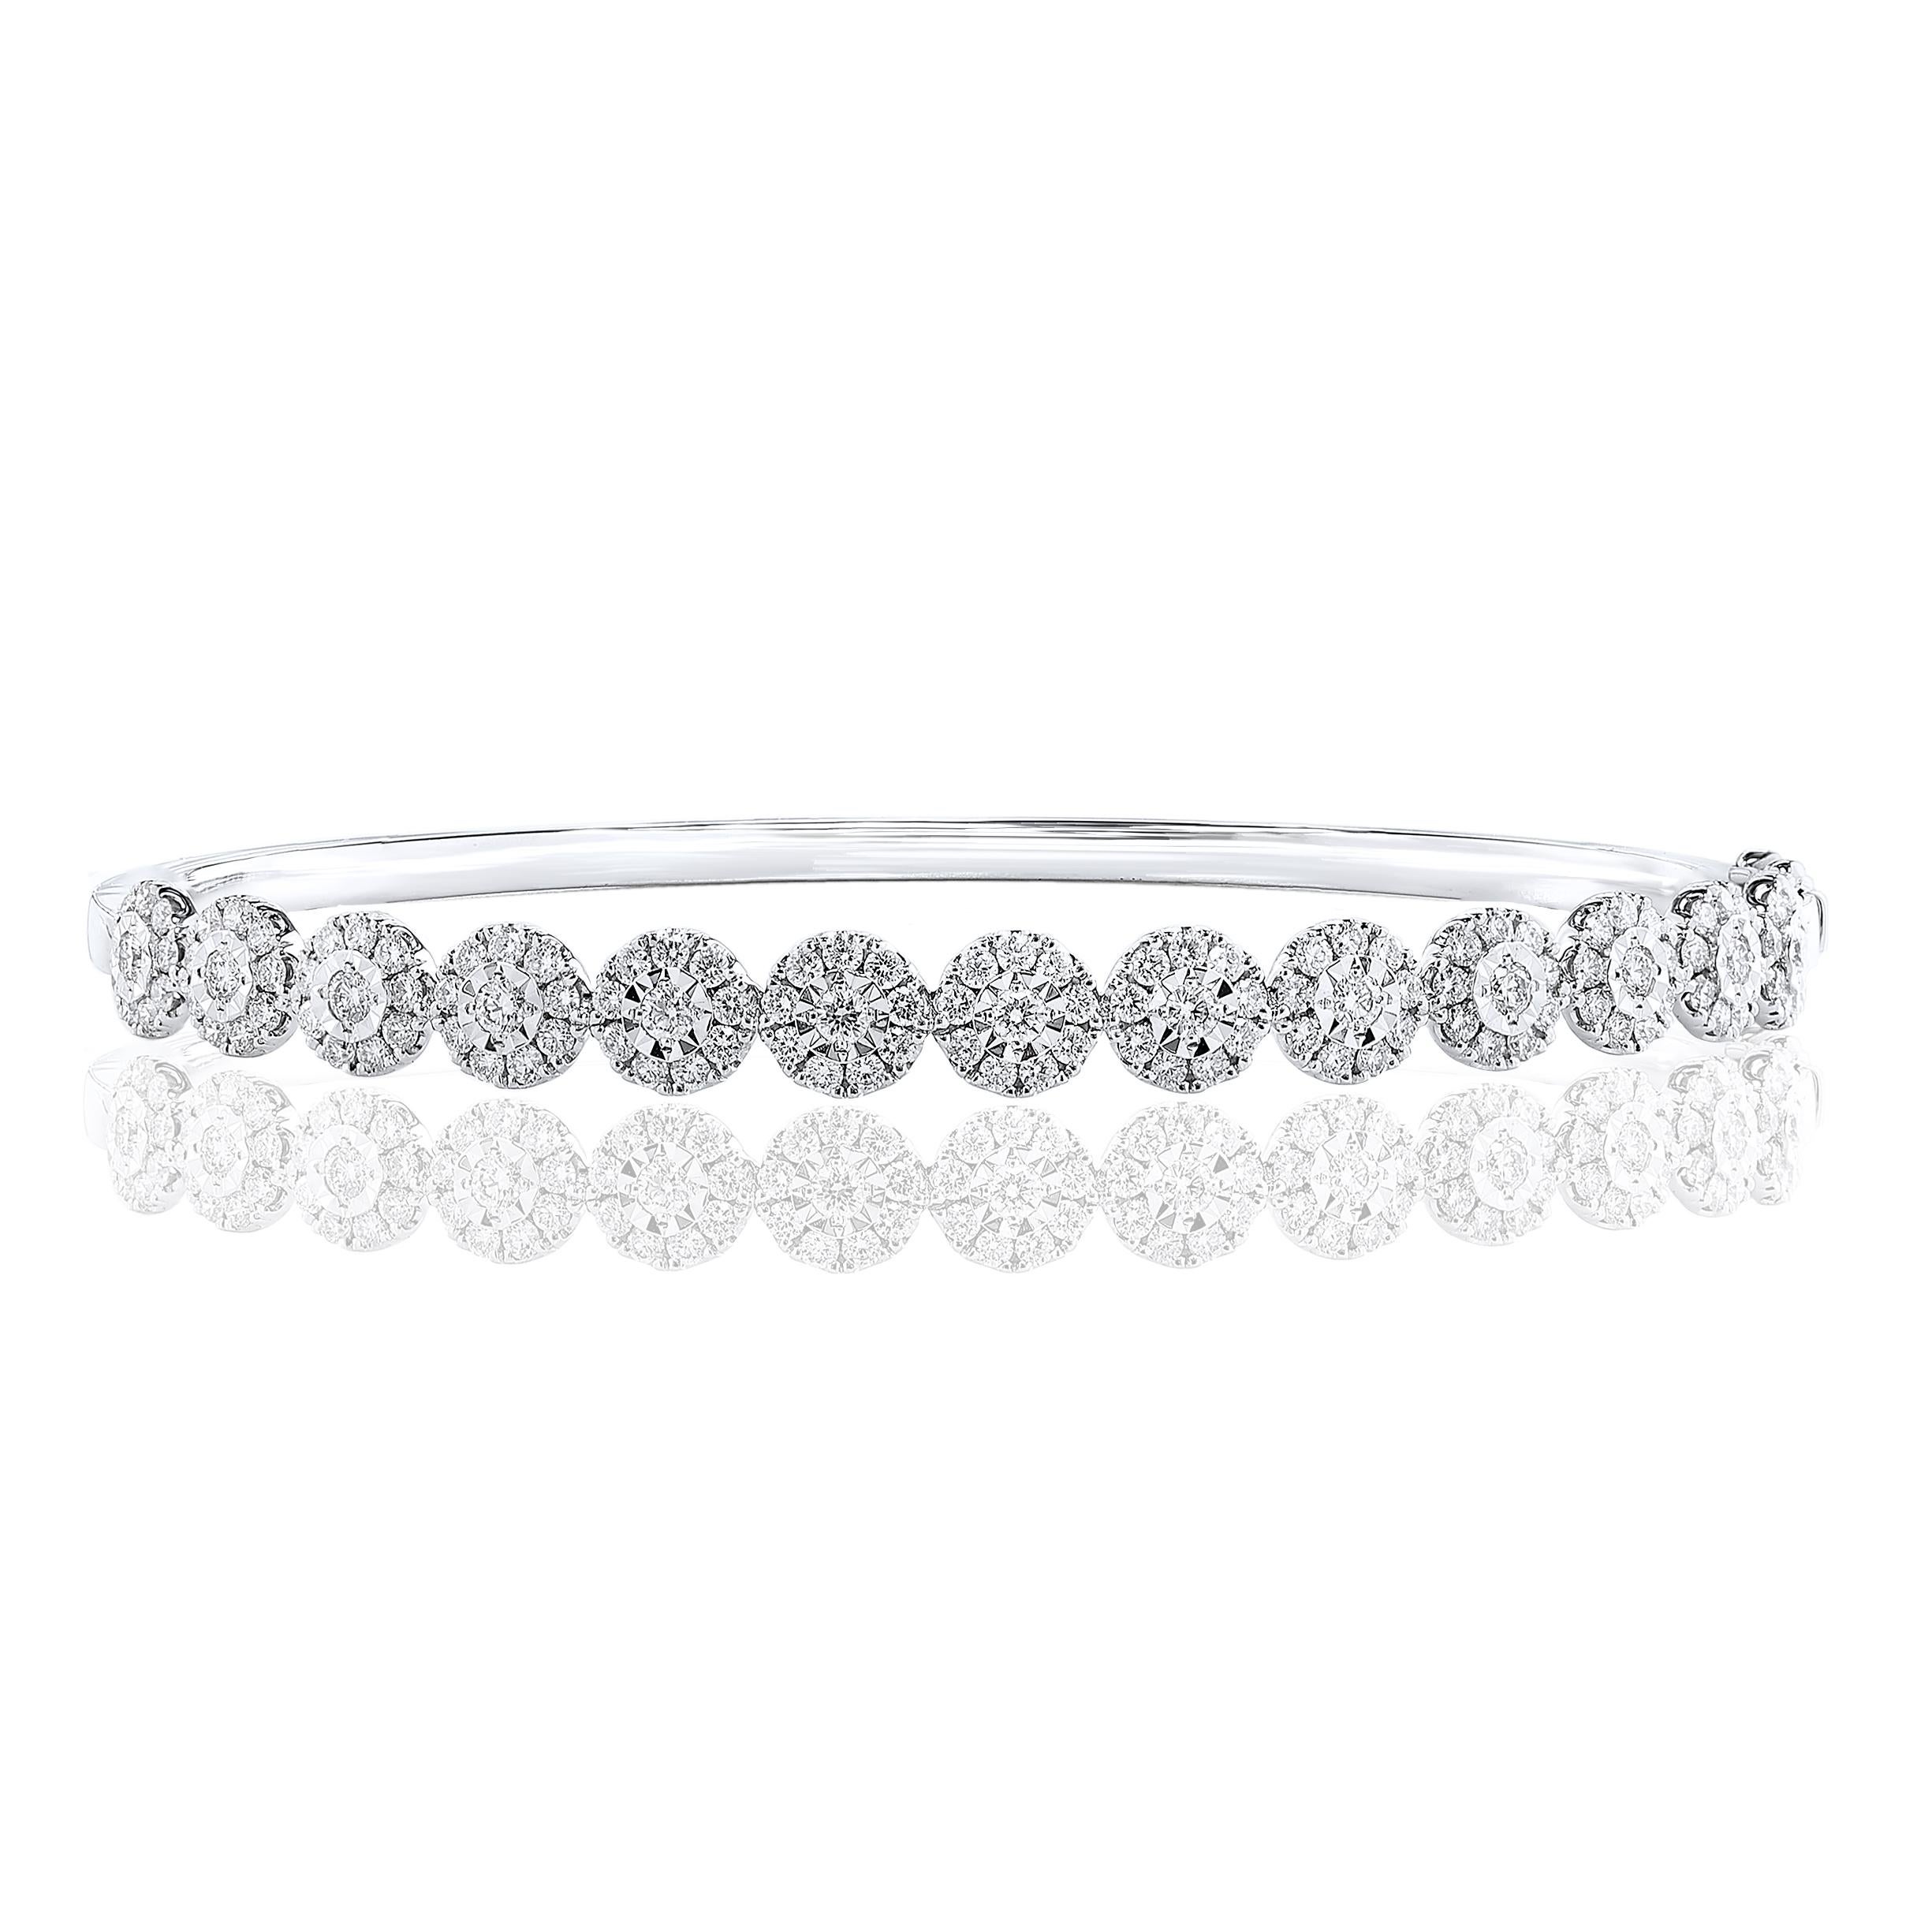 A fashionable bangle showcasing 130 brilliant cut diamonds weighing 1.47 carats total. Set in a polished 18K White Gold mounting. 

Style is available in different price ranges. Prices are based on your selection. Don't hesitate to get in touch with